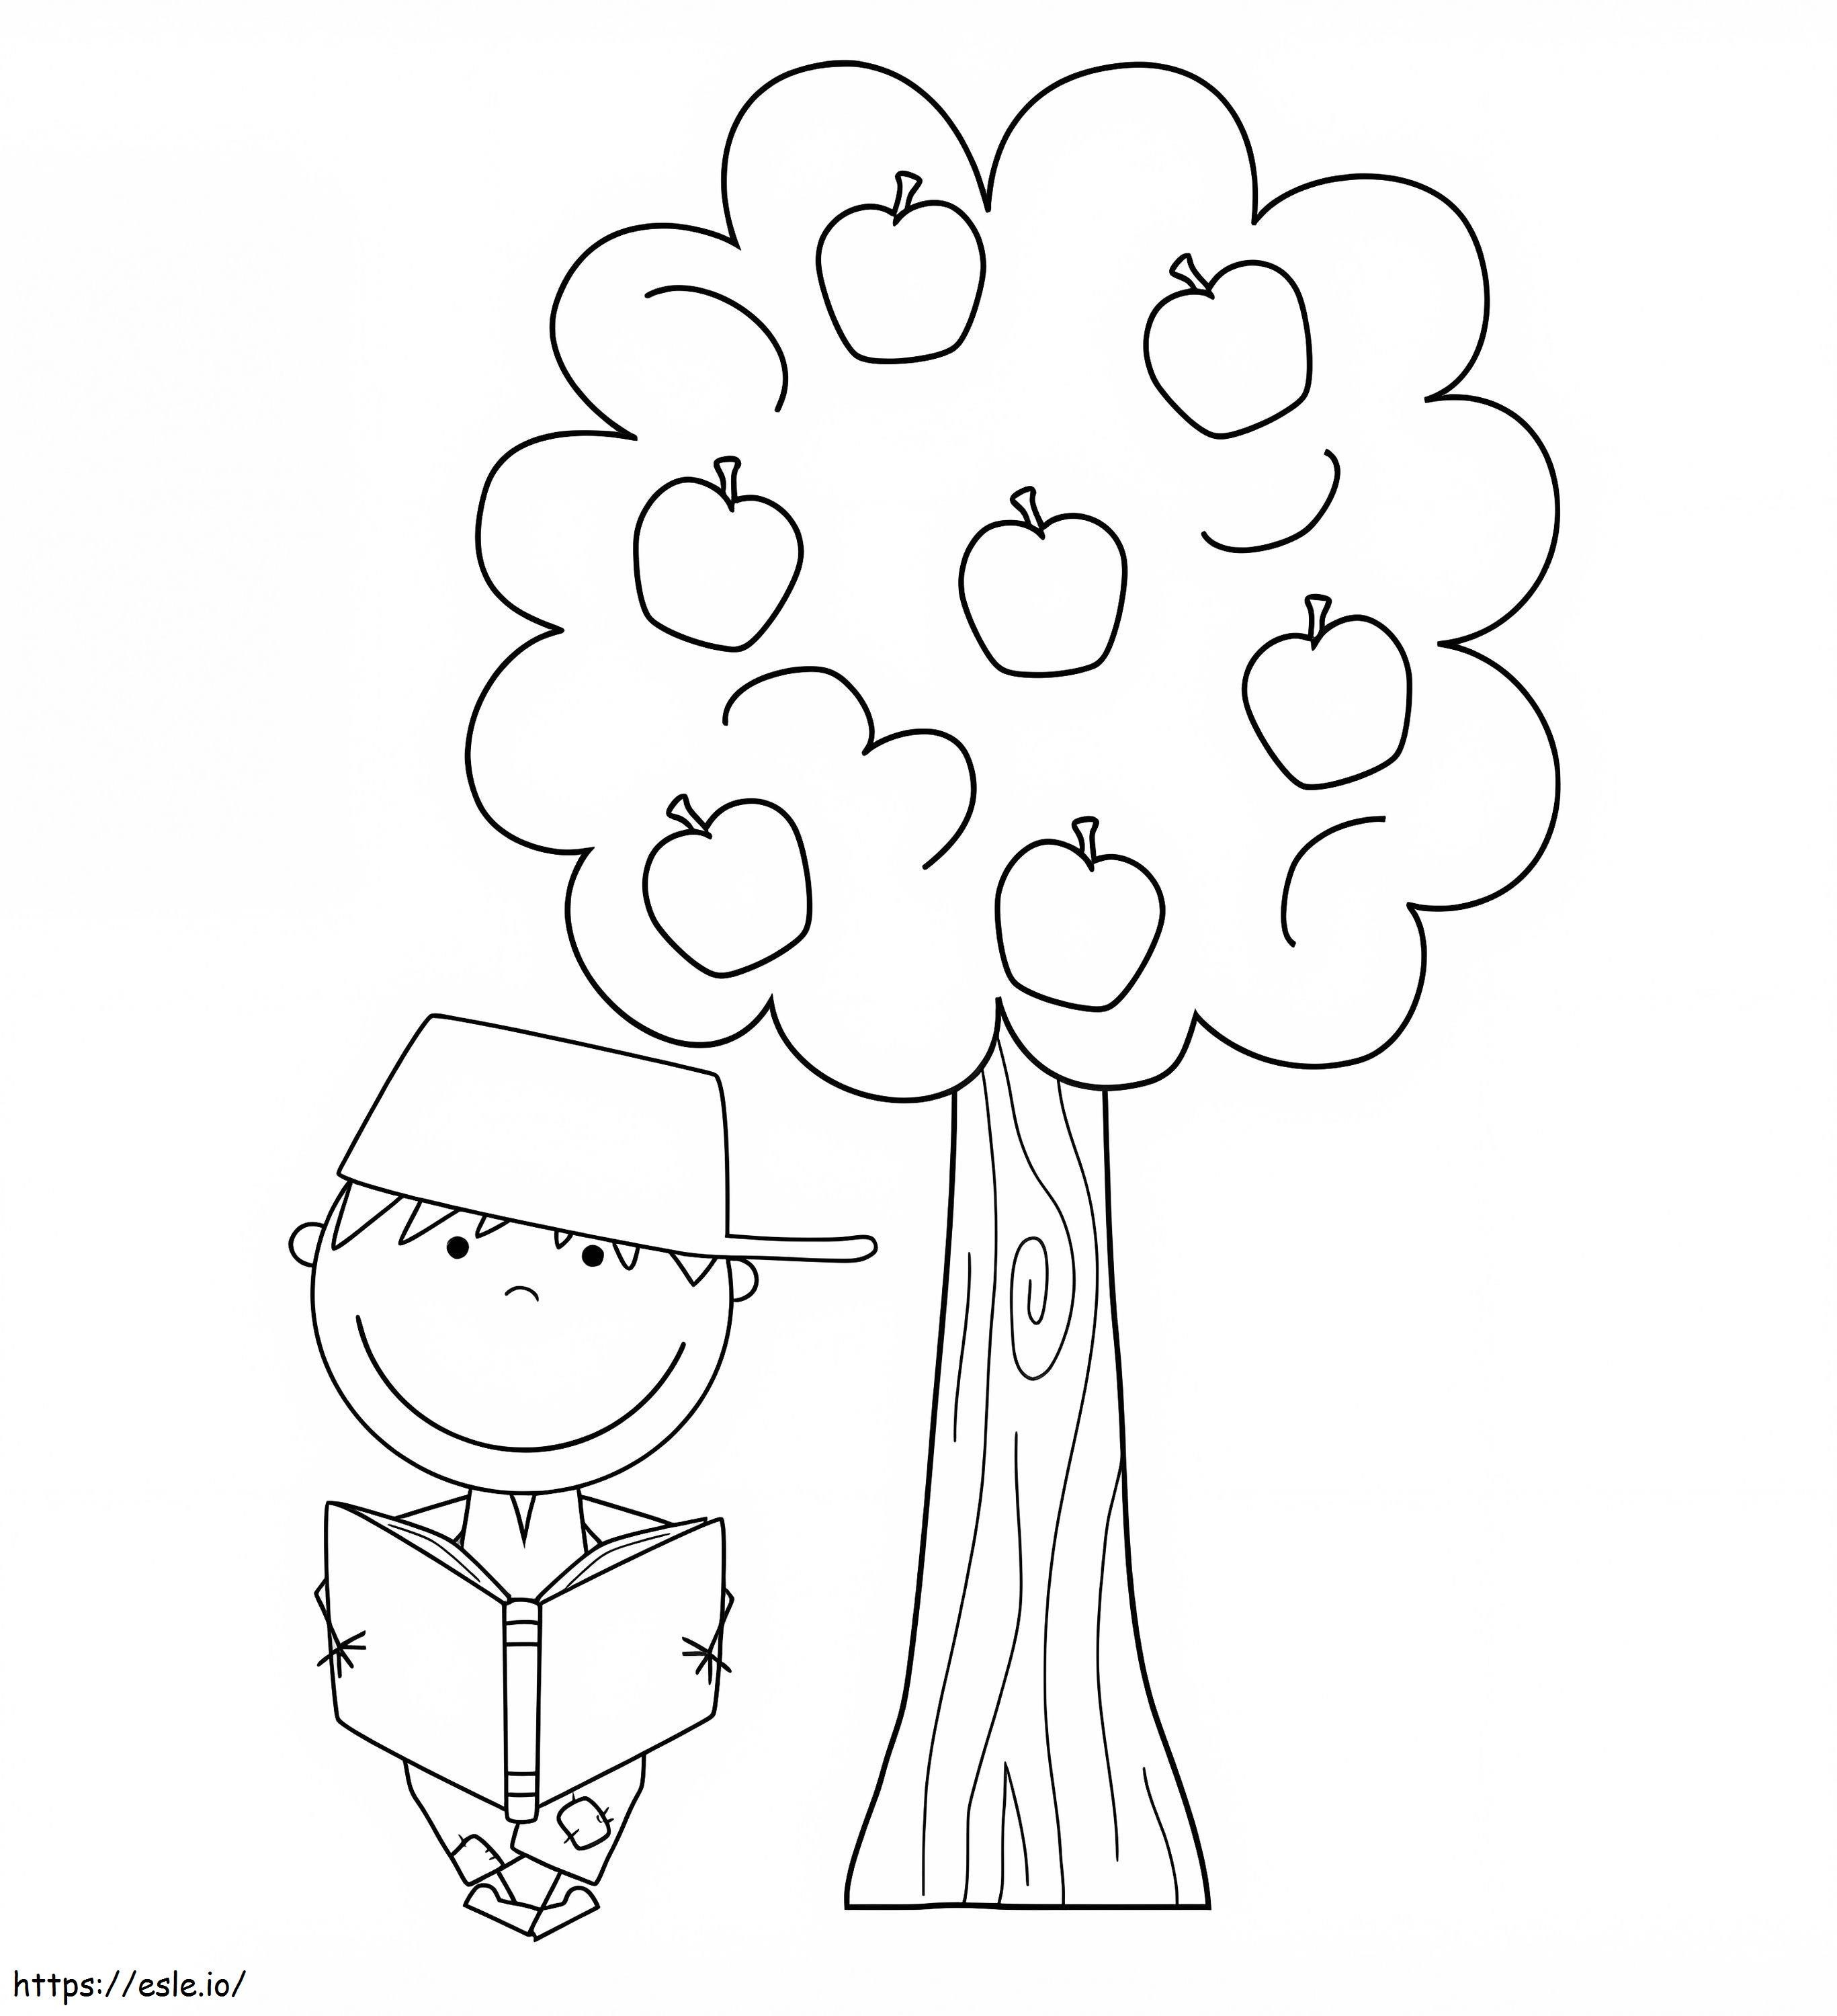 Johnny Appleseed Reading coloring page